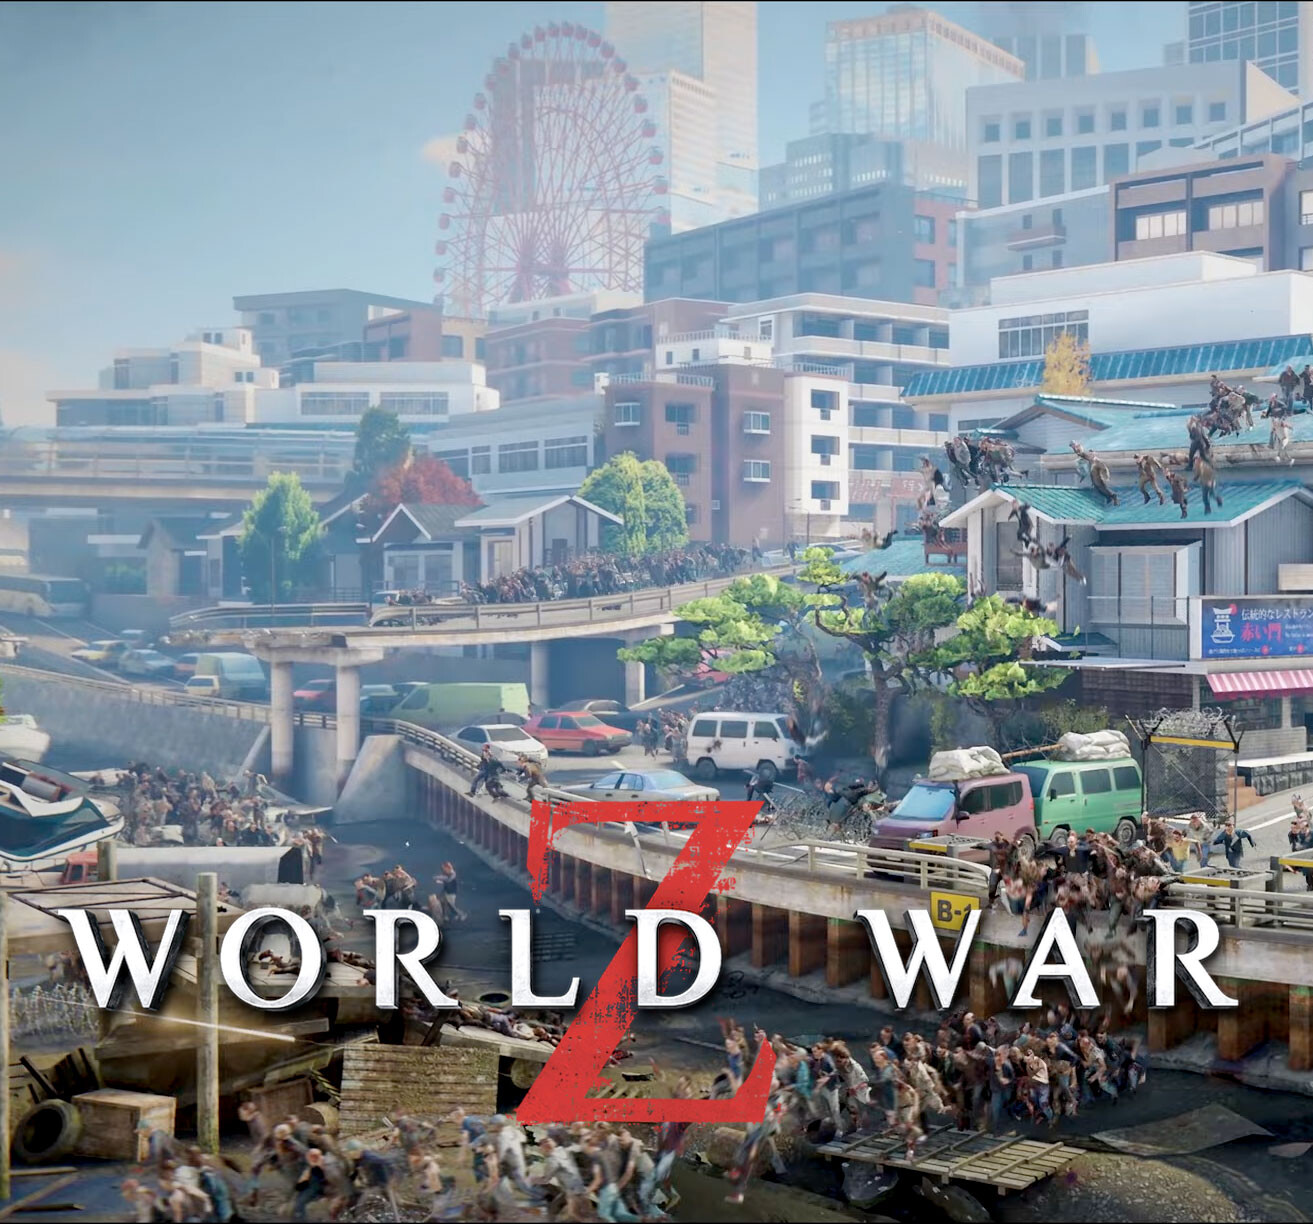 World War Z: Aftermath's New Horde Mode XL And Free PlayStation®5